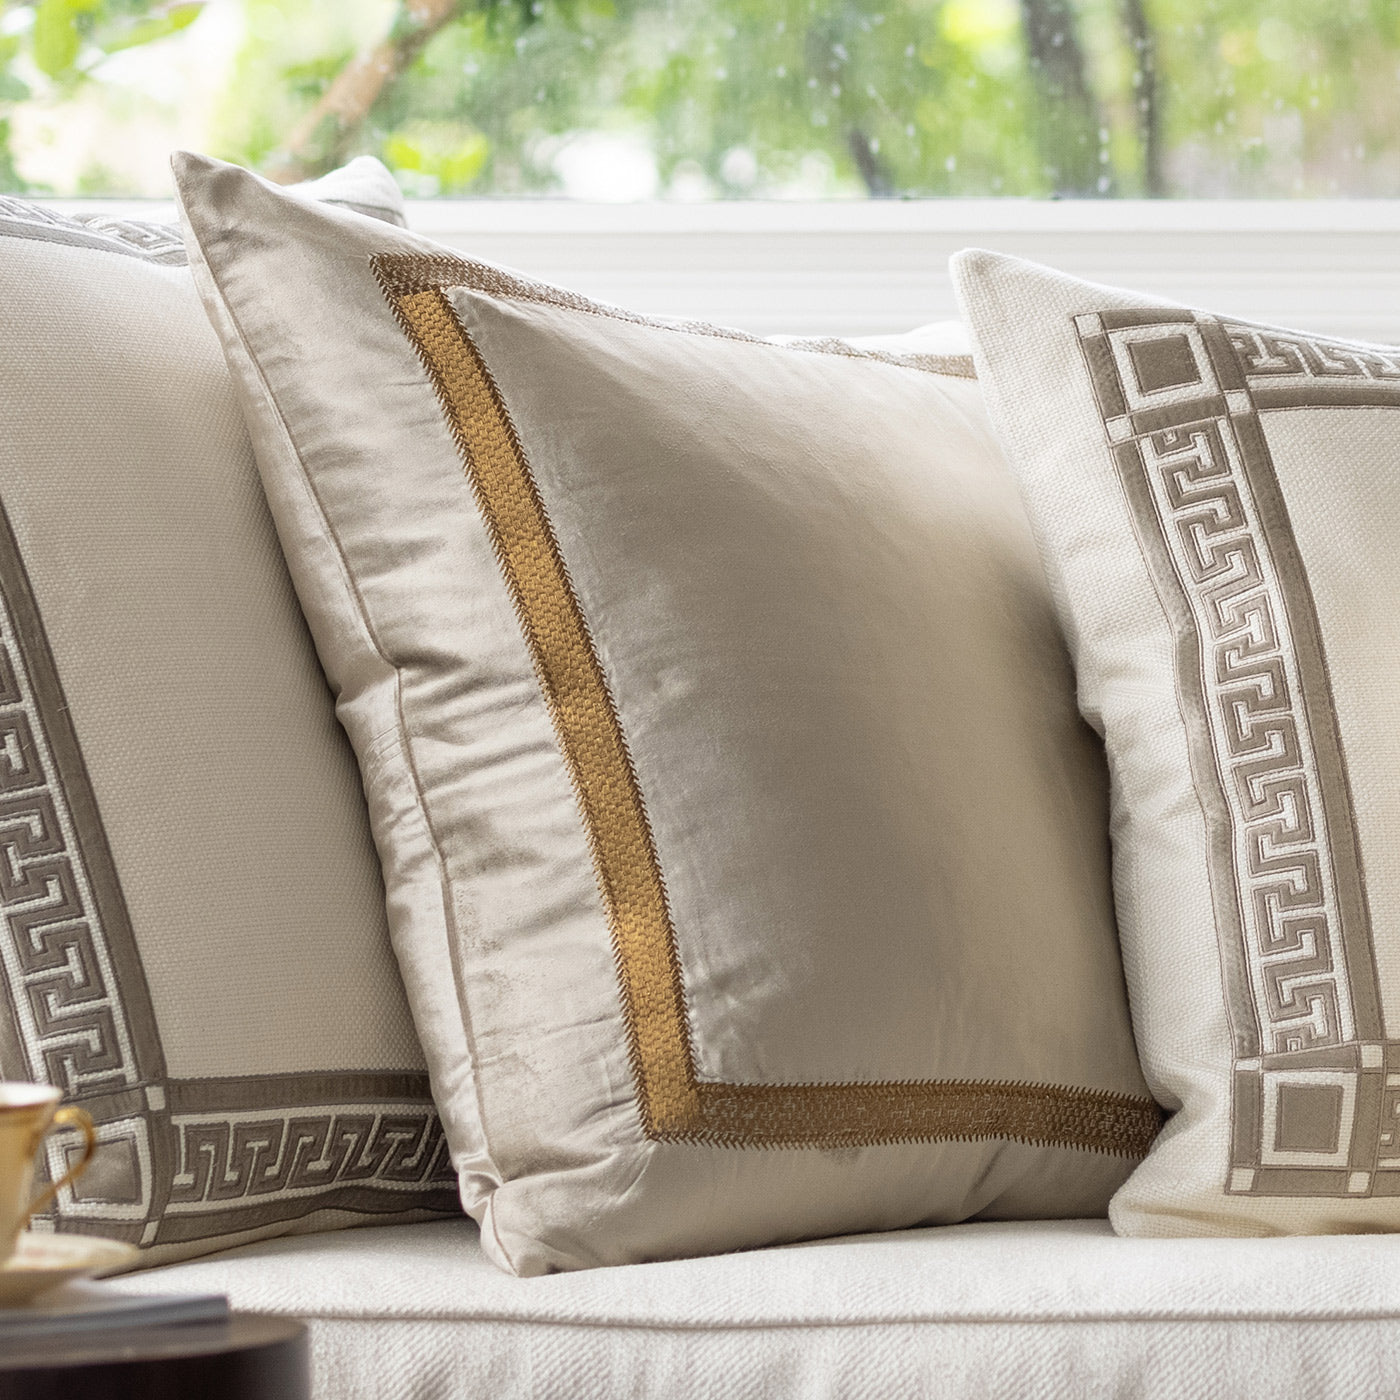 Cleo European Pillow Fawn / Gold 26X26 (Insert Included)